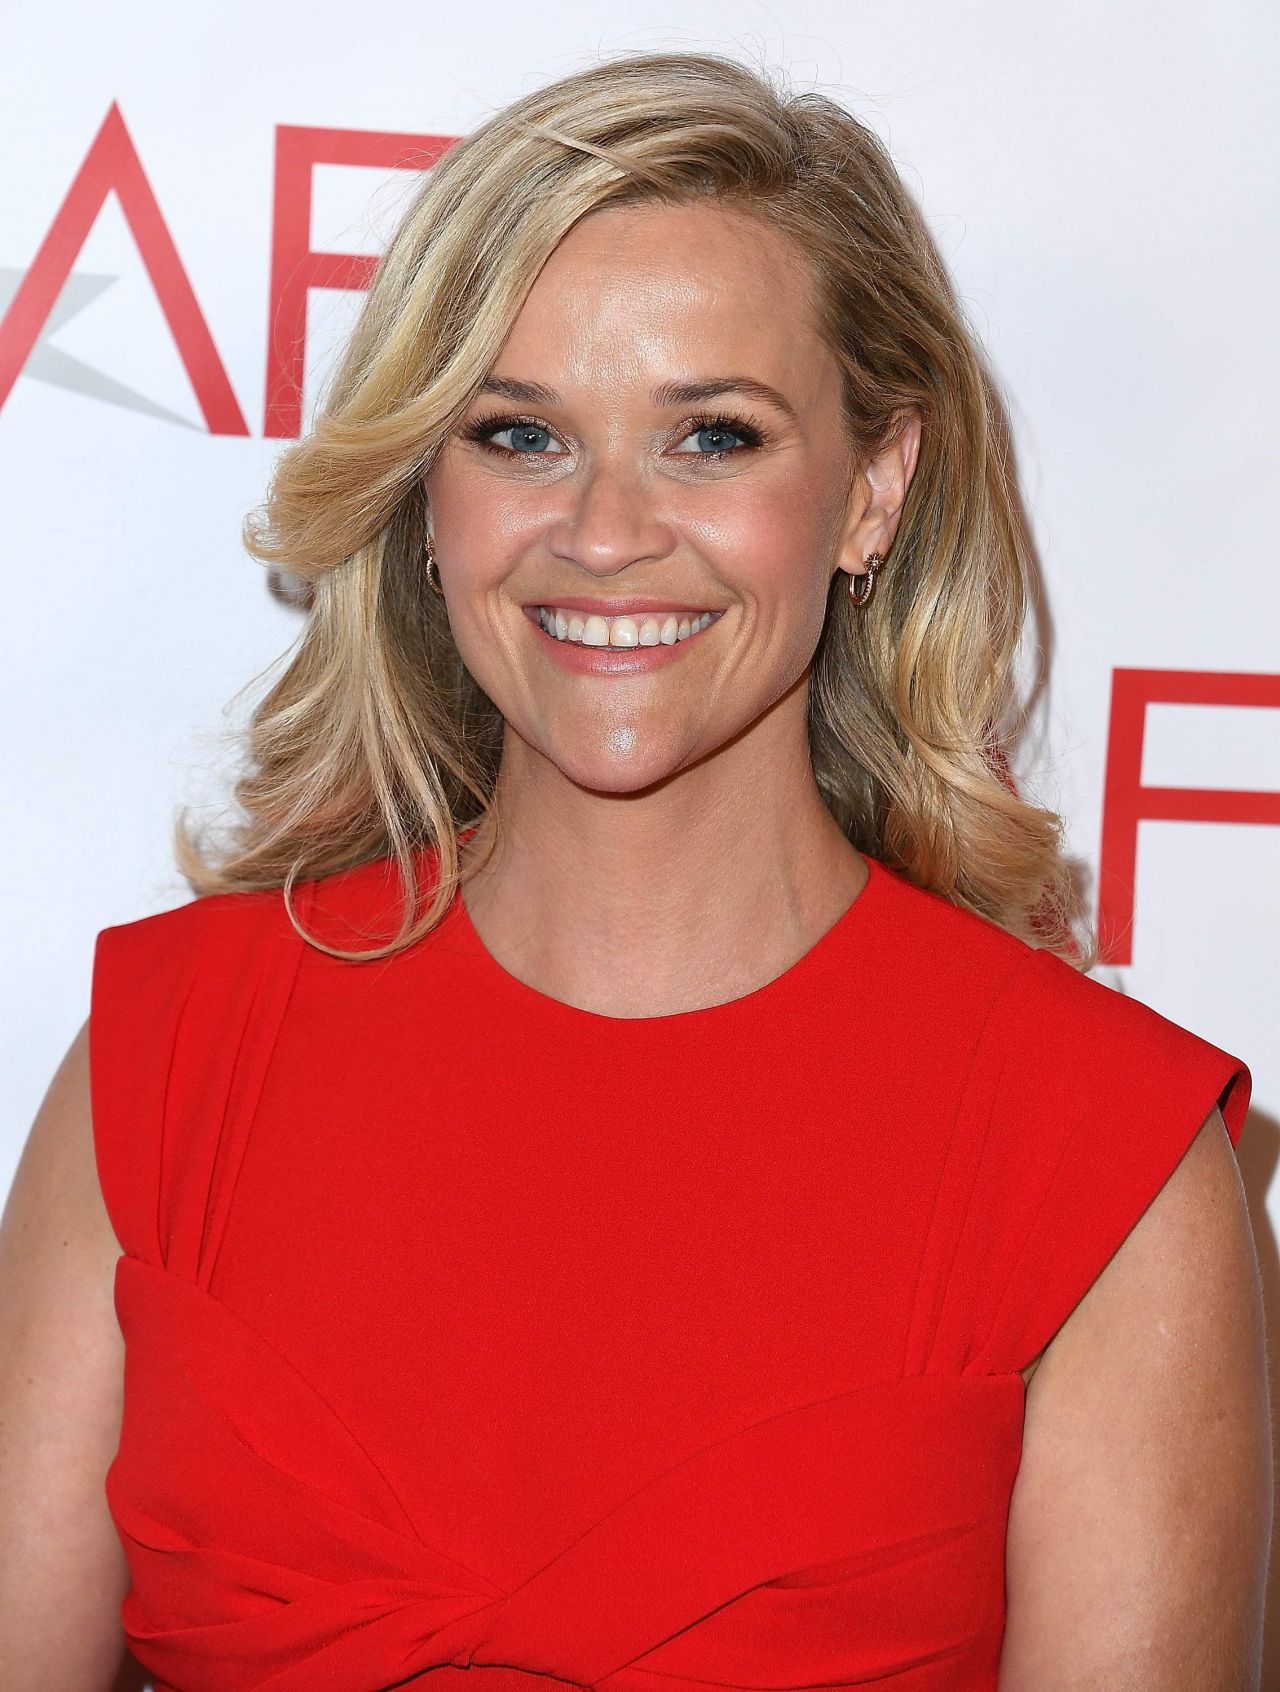 Reese Witherspoon - AFI Awards 2018 in Los Angeles